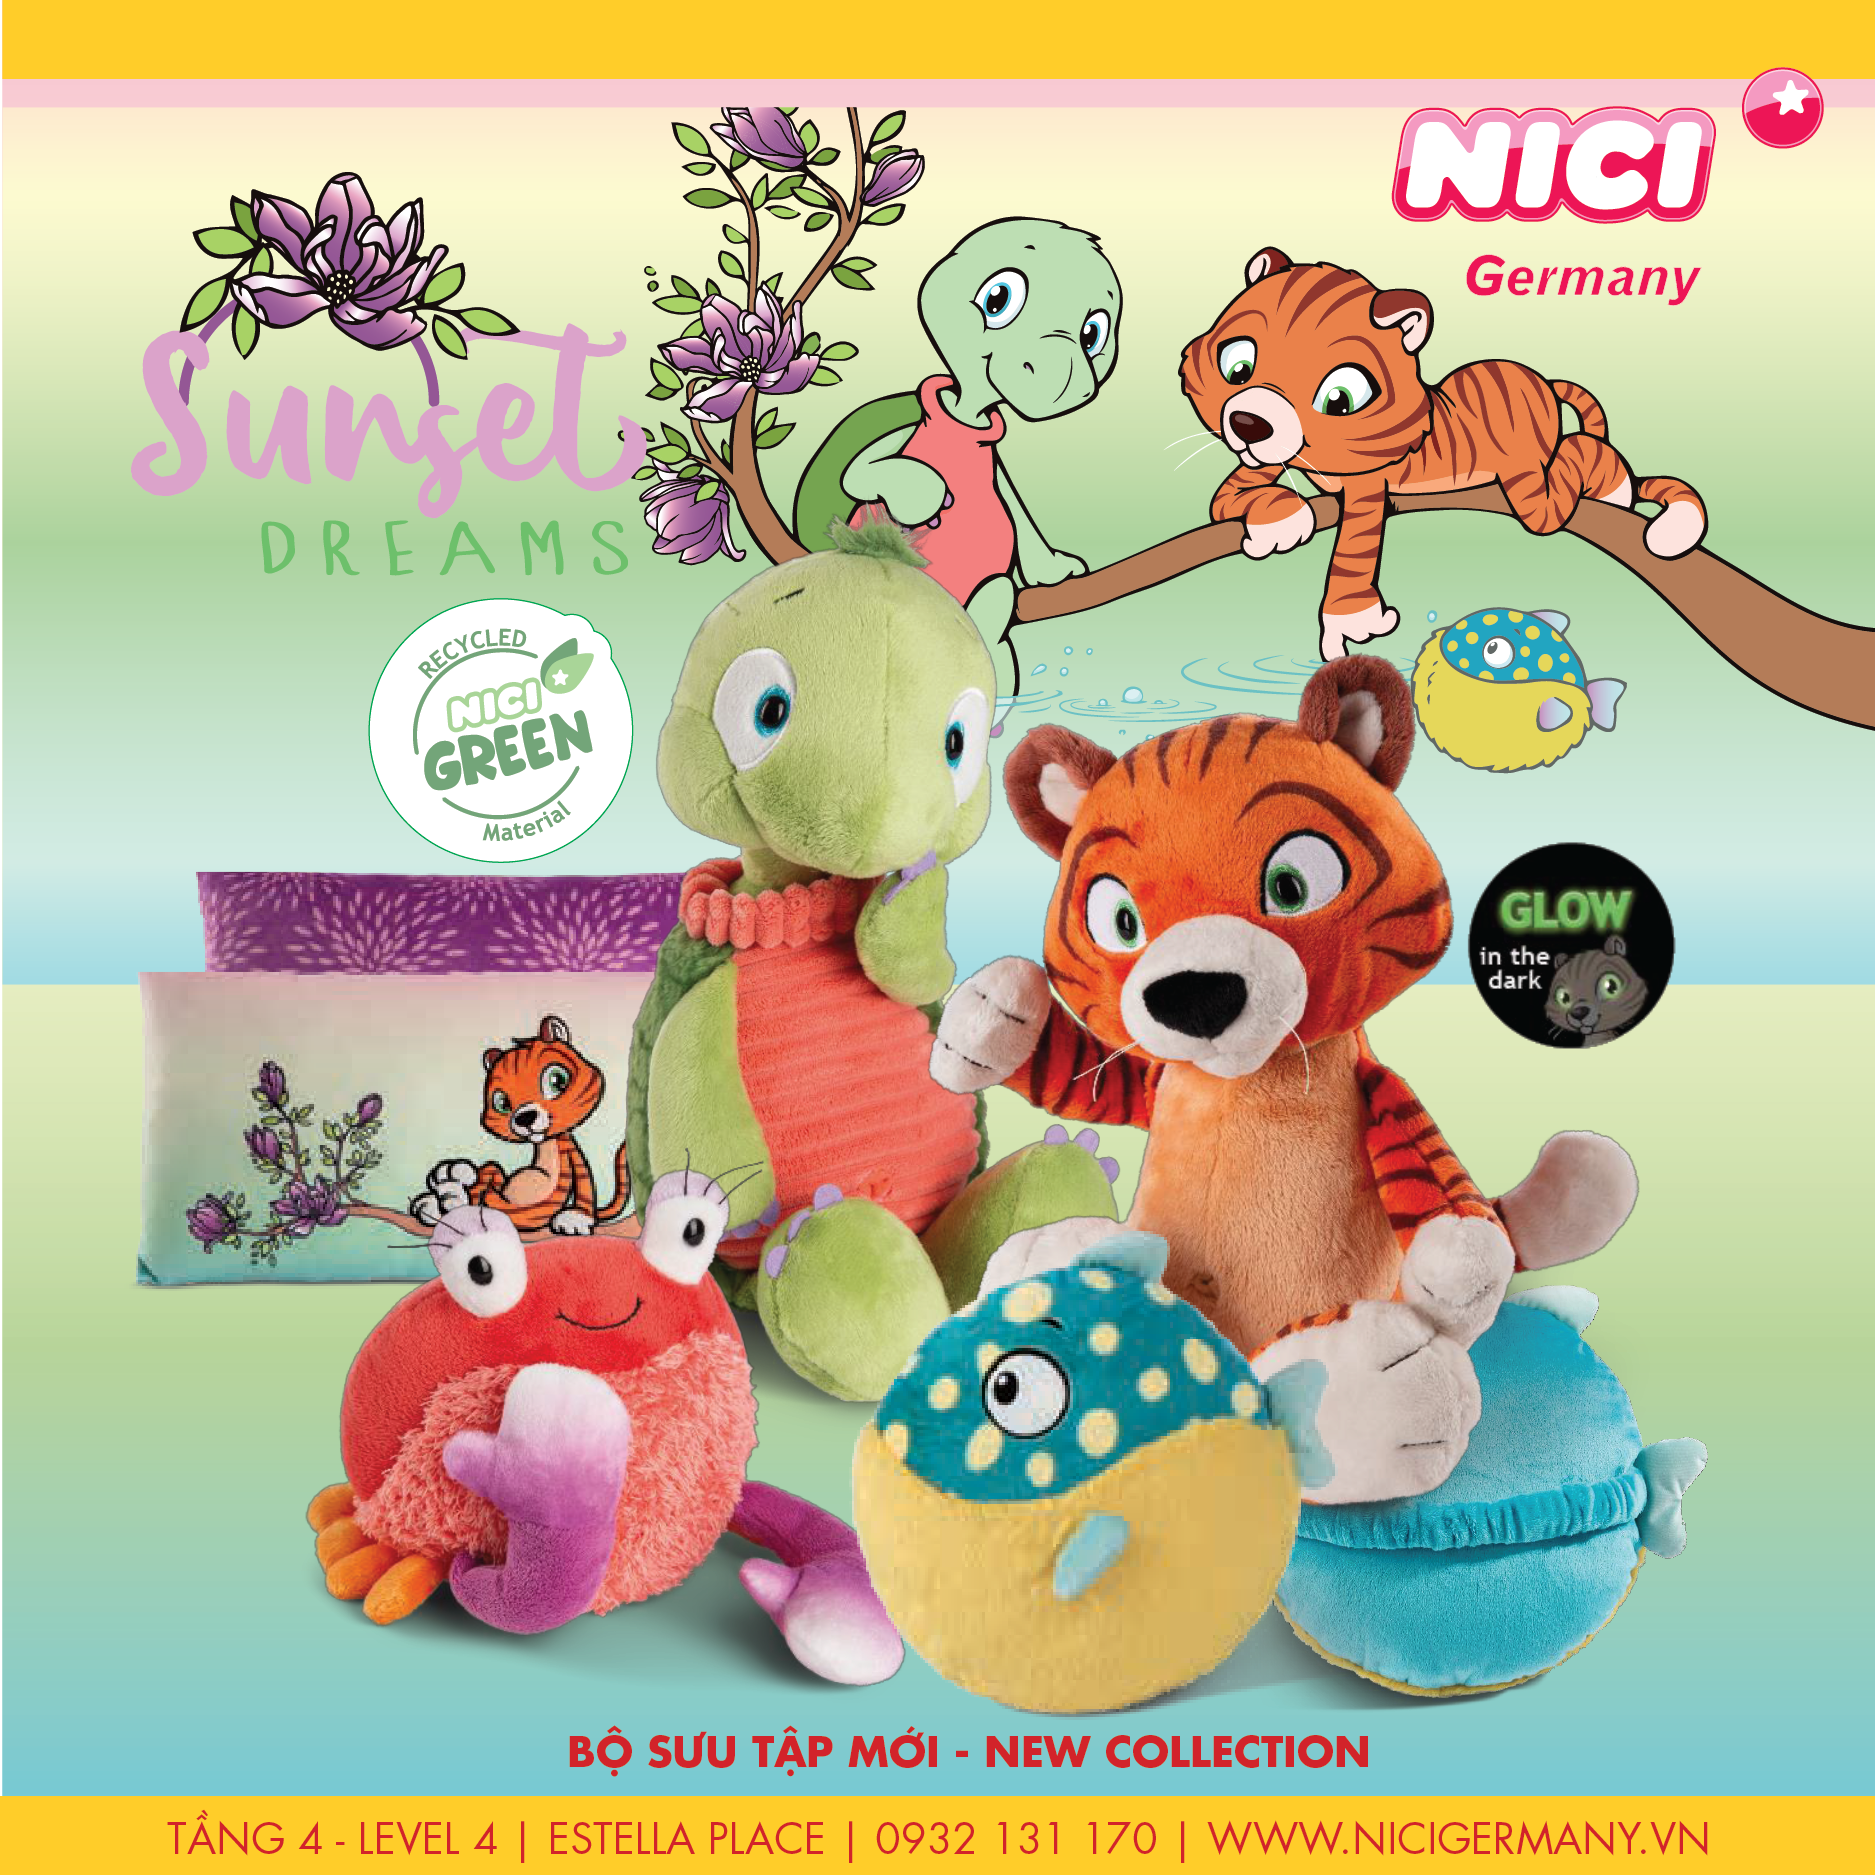 NICI GERMANY - NEW COLLECTION - "SUNSET DREAMS"